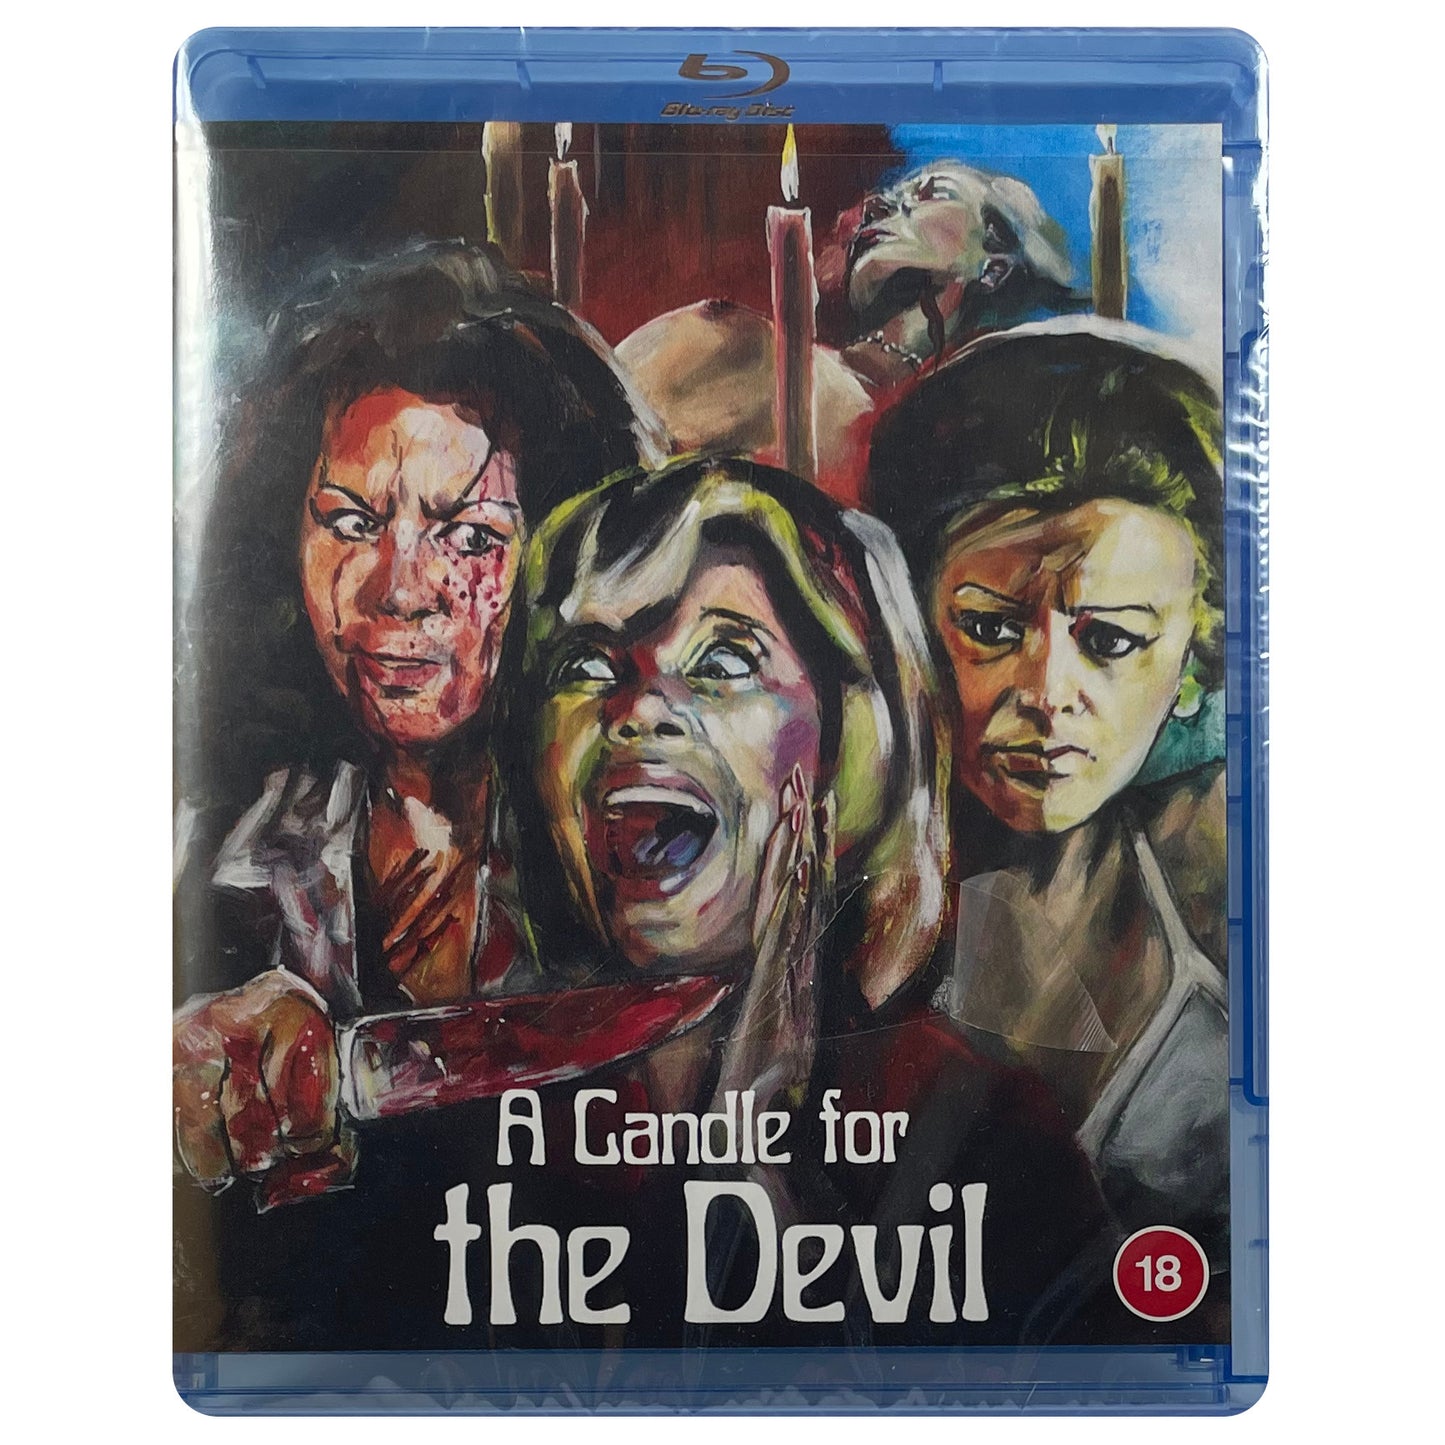 A Candle for the Devil Blu-Ray **Slightly Bent and Damaged Case**